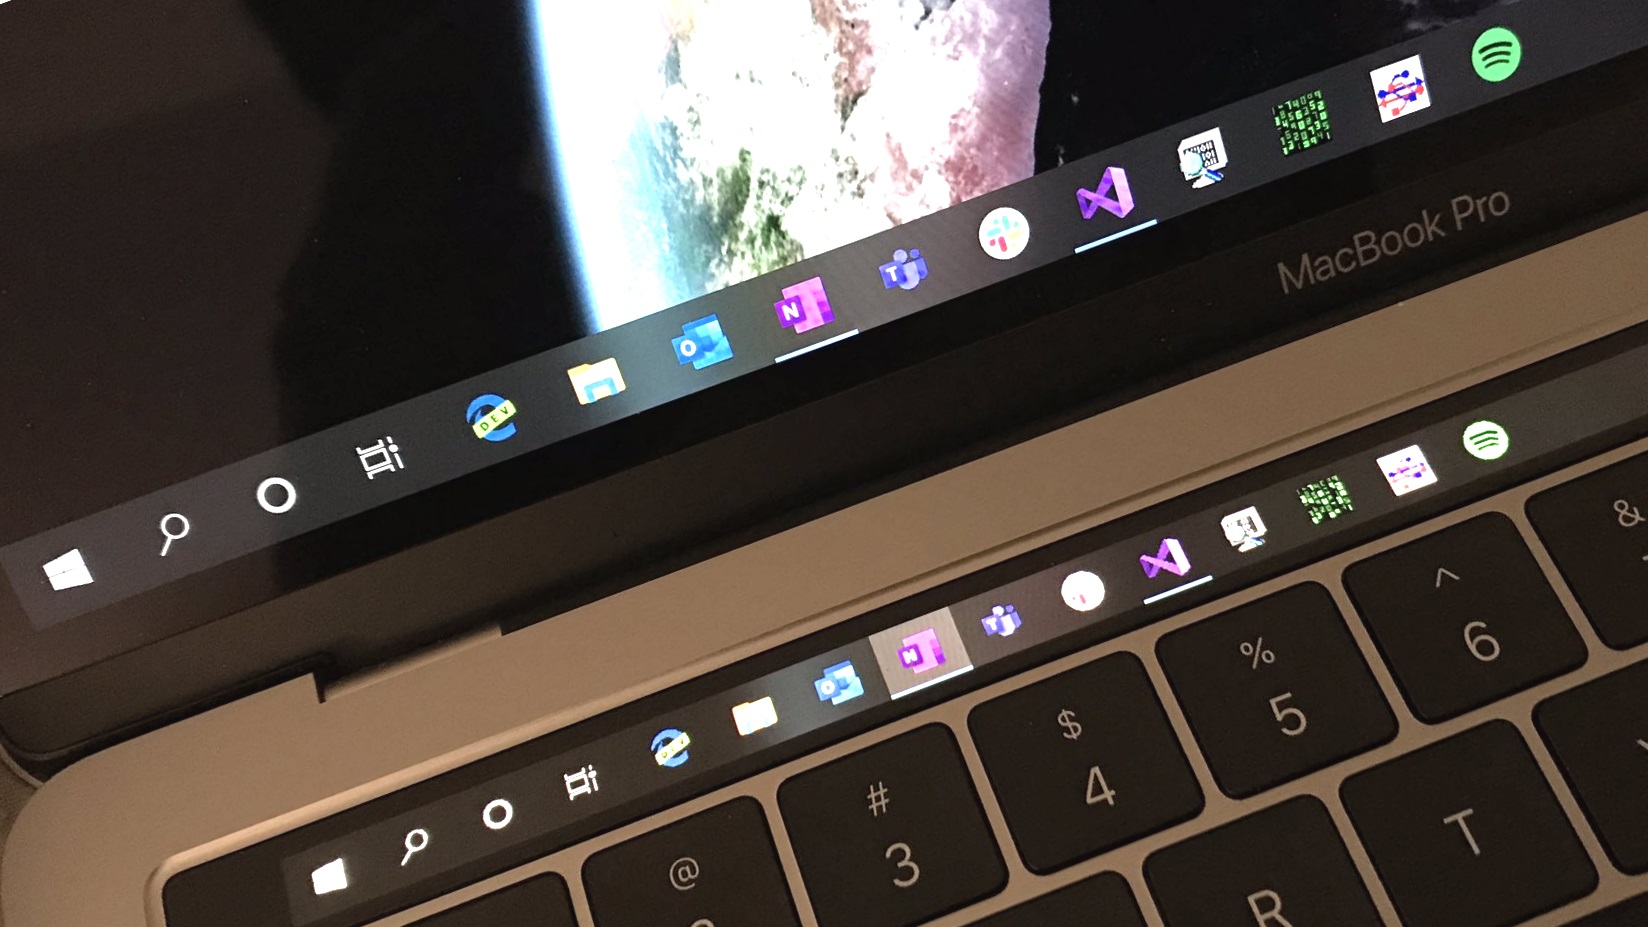 This hack has made the MacBook Pro Touch Bar useful – but only when running  Windows 10